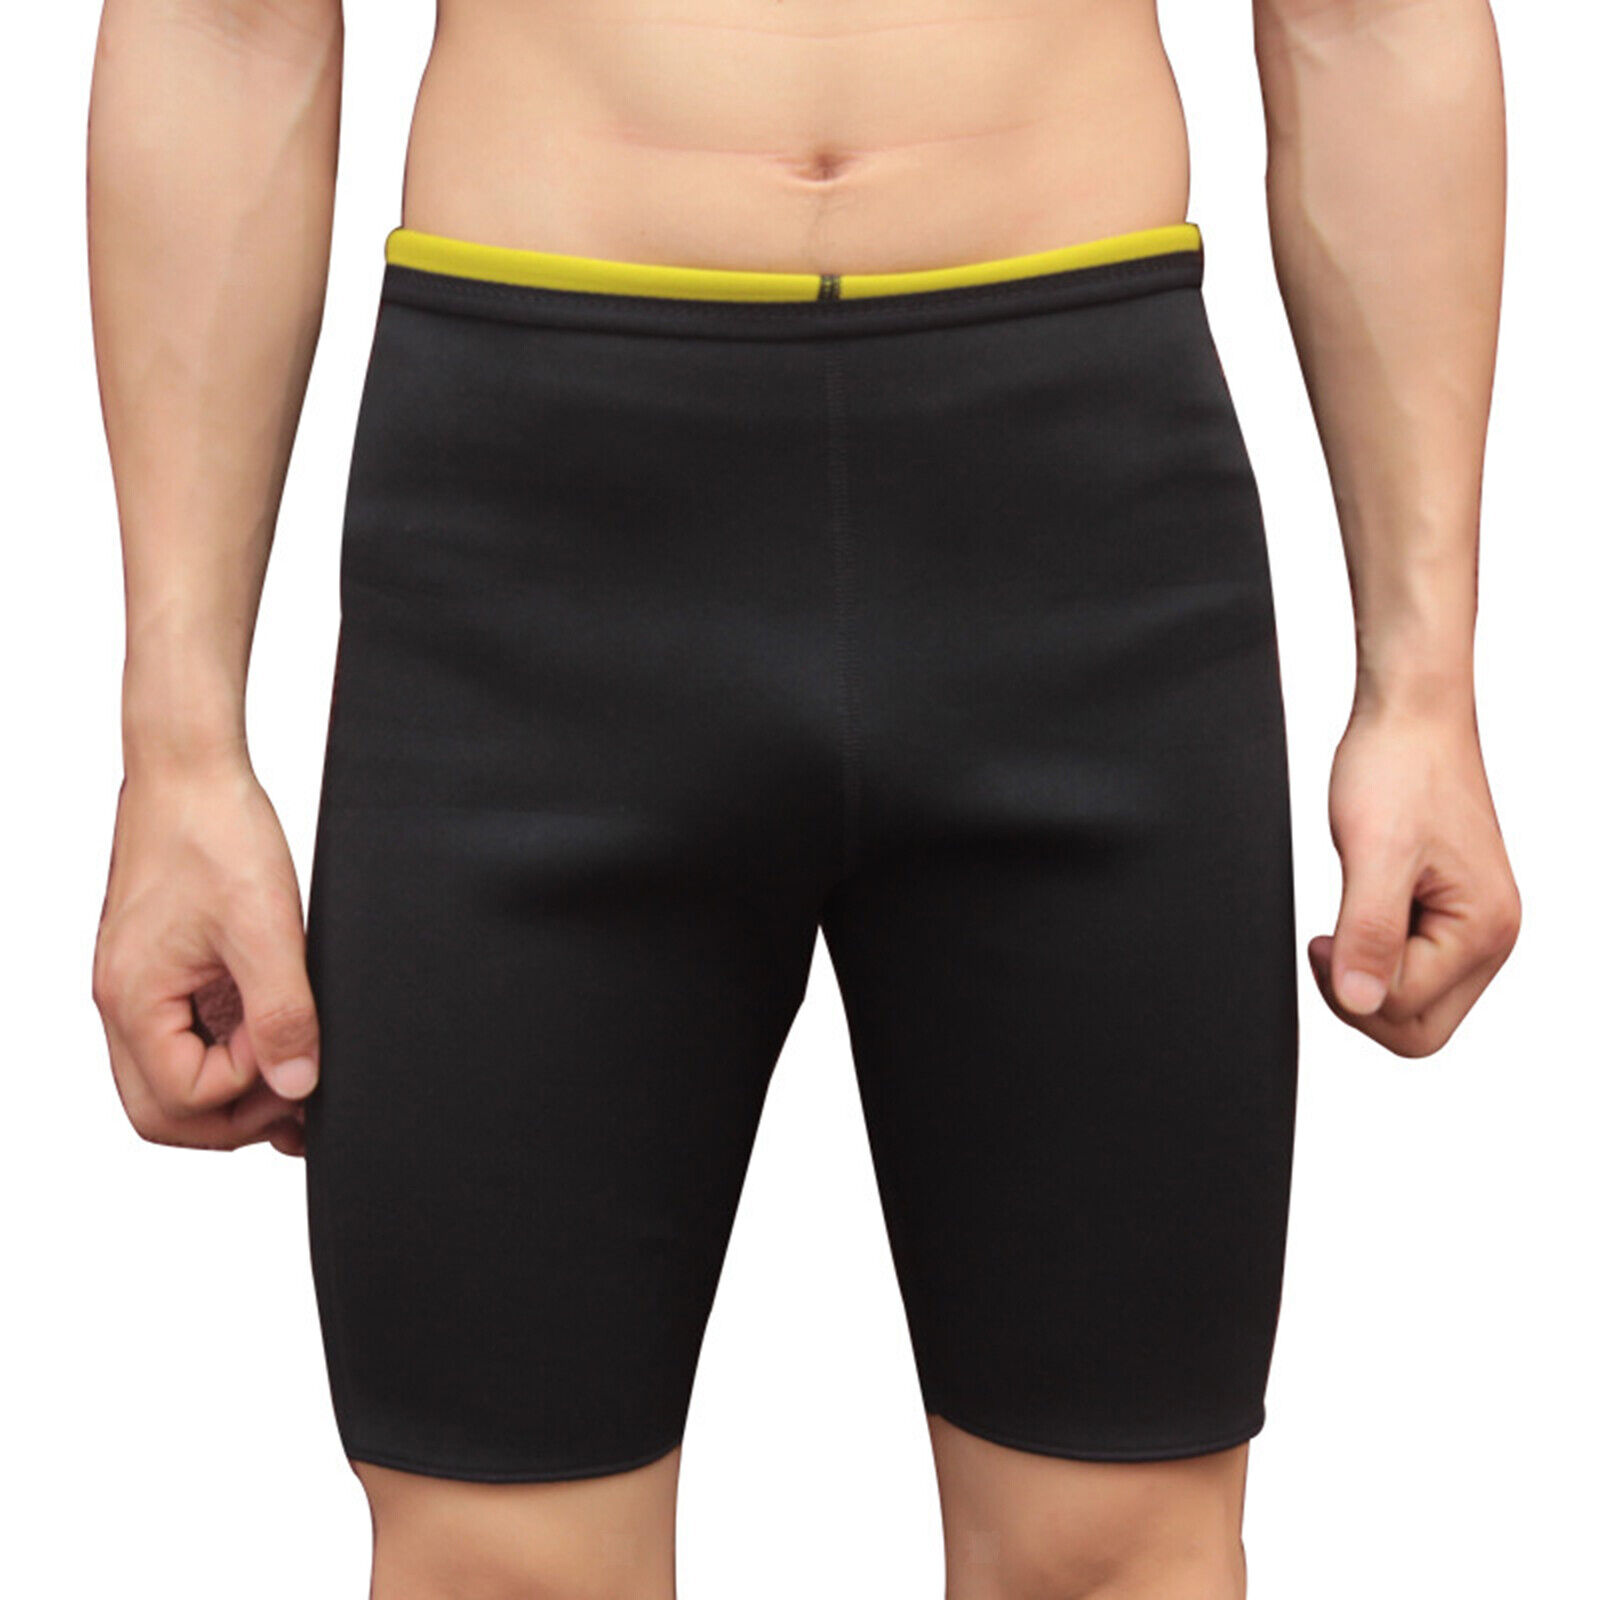 3mm Men Wetsuit Scuba Diving Shorts for Diving, Swimming, Snorkeling, Surfing